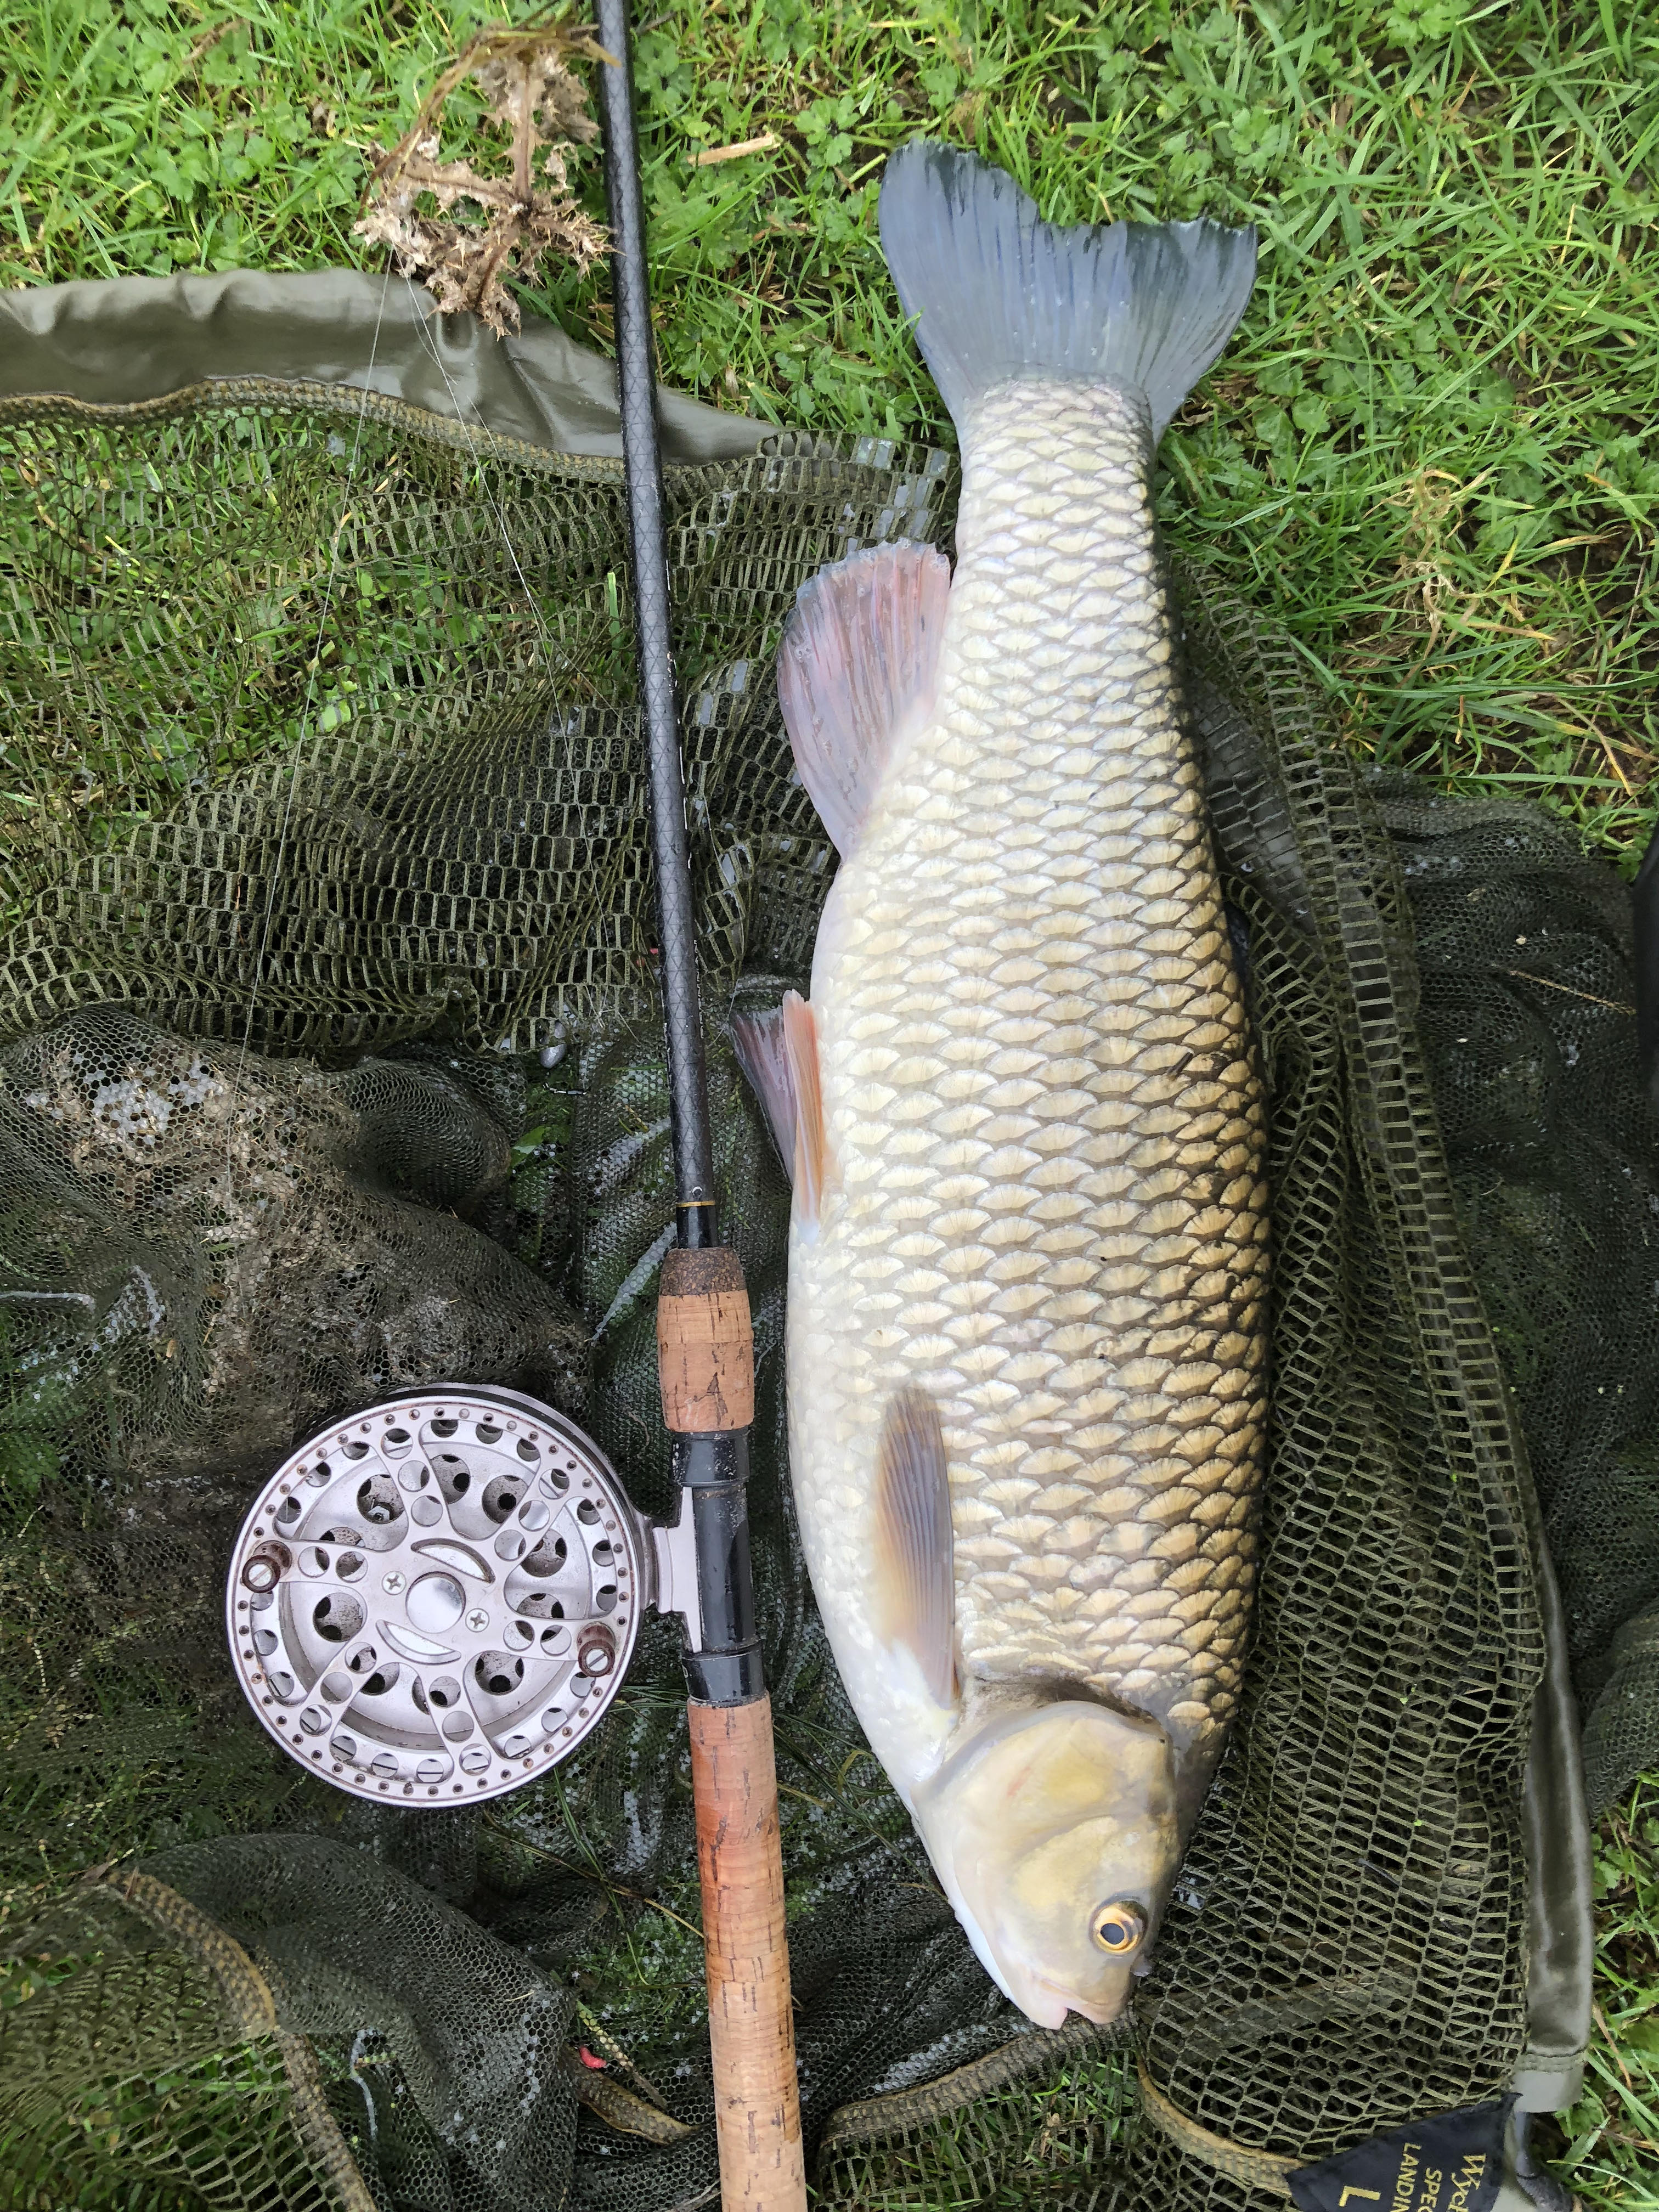 Cadence CR10 14ft #4 Match Rod – The Leviathan Tamer! - Cadence Fishing  Blog - Coarse Fishing Articles